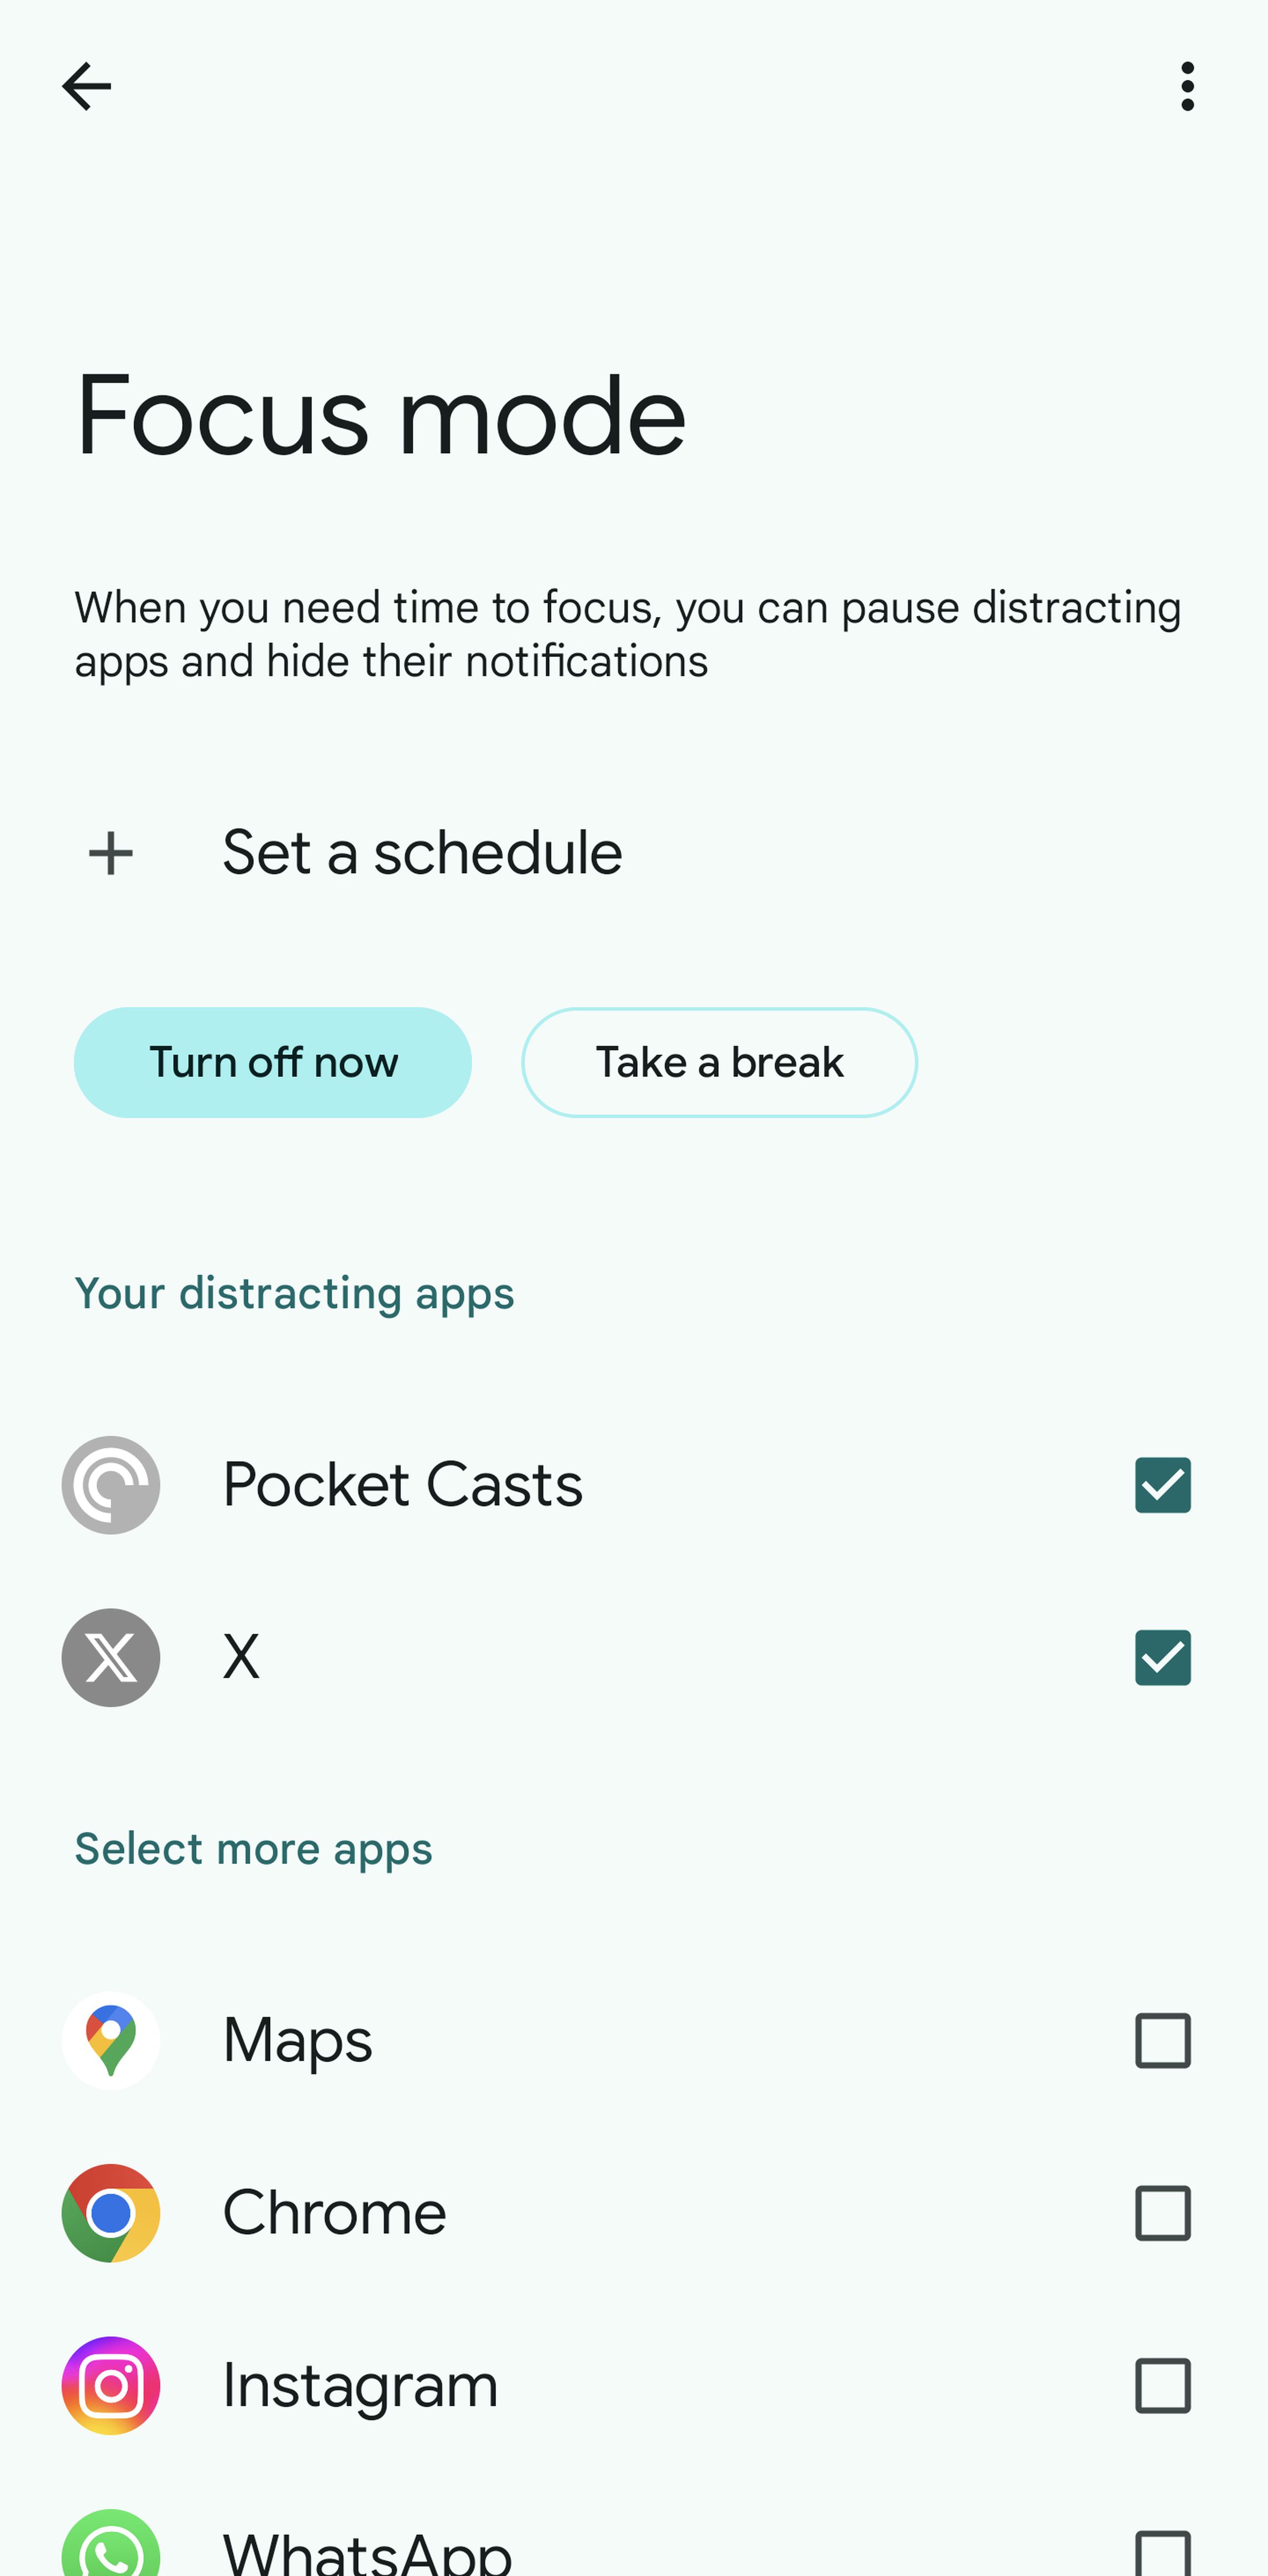 Mobile screen headed Focus mode, then “Set a schedule” with a list of various apps below it.